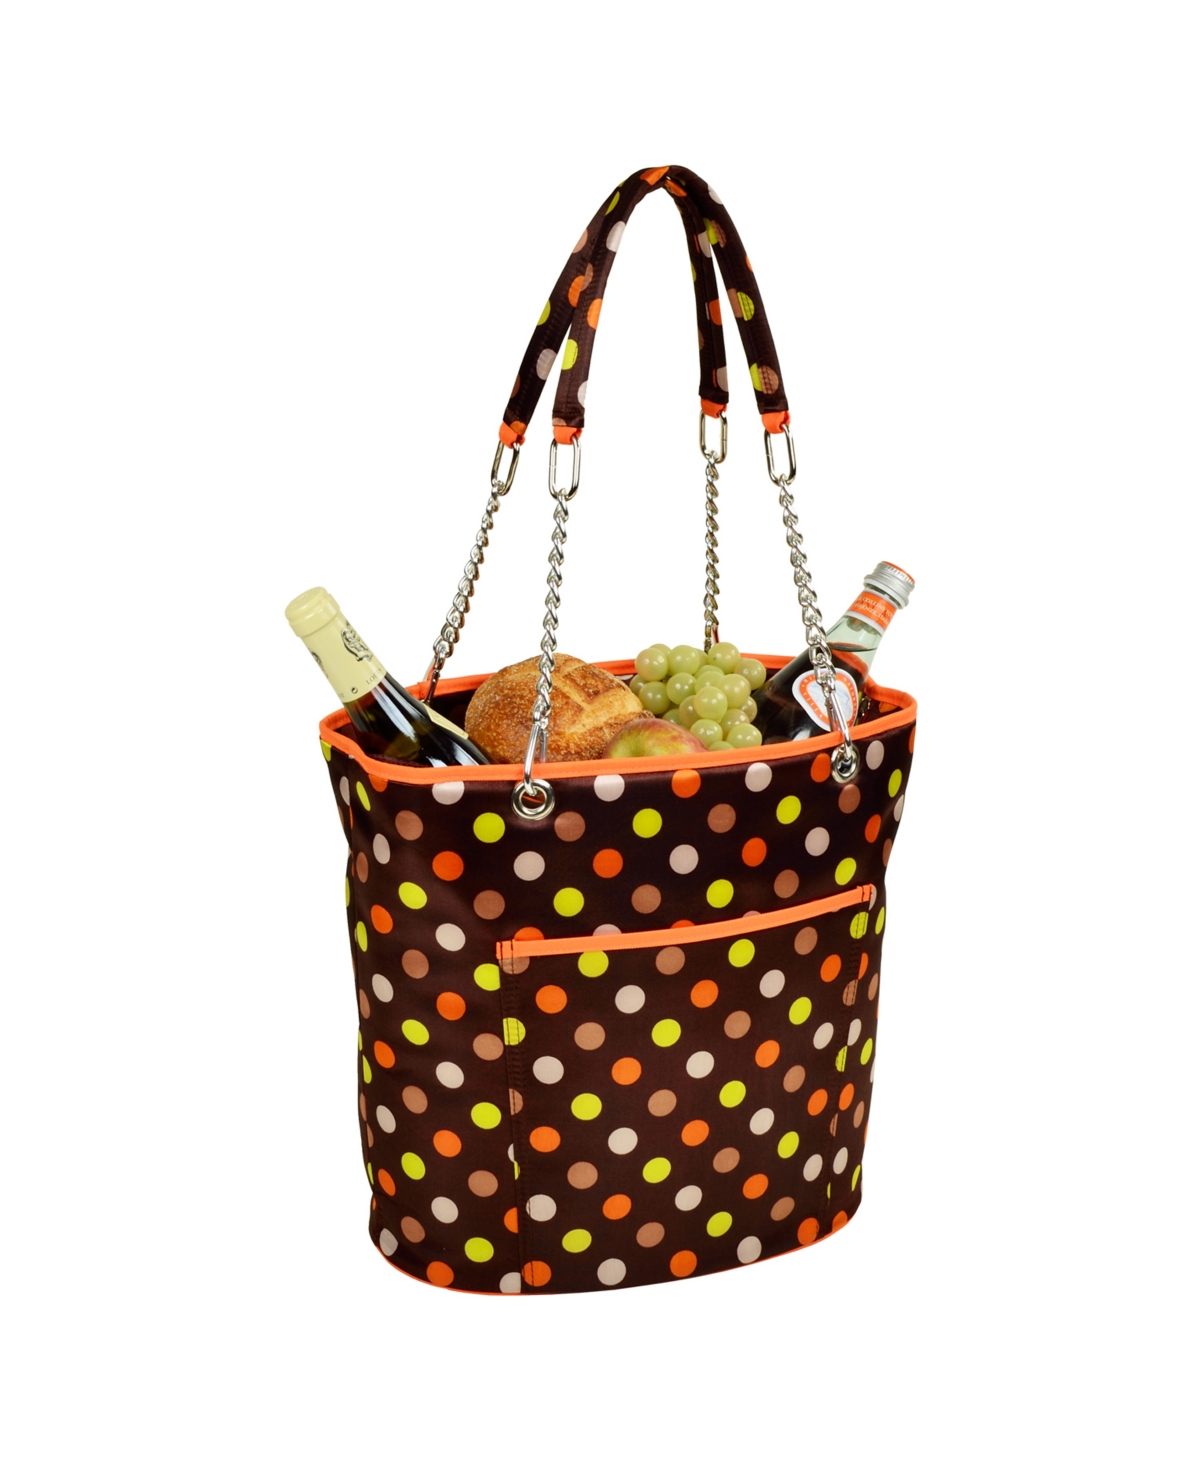 Insulated Fashion Cooler Bag - 22 Can Leak Proof Tote - Orange